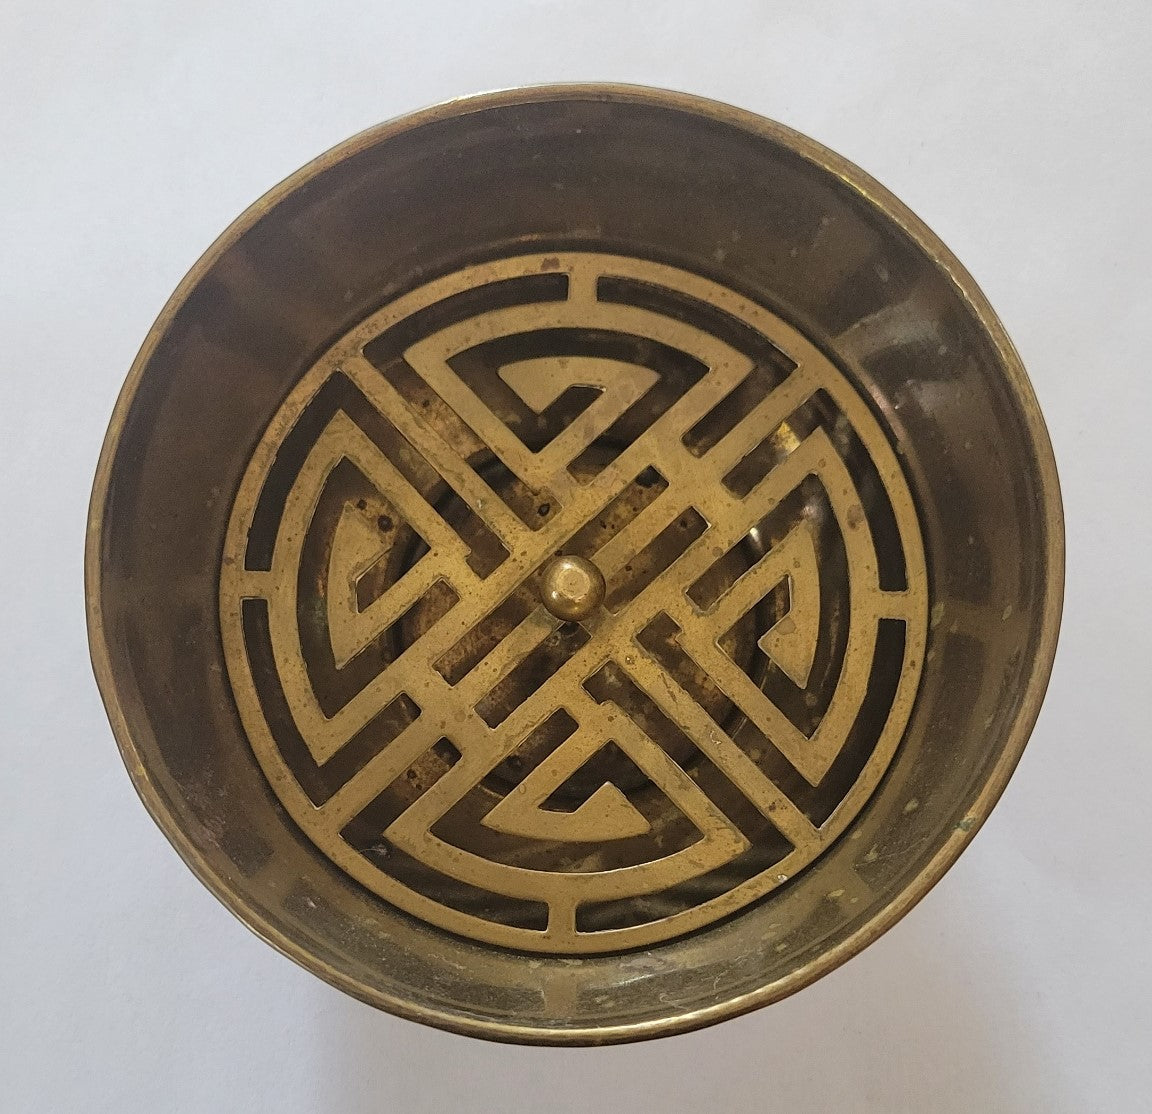 Vintage brass incense bowl with insert and engravings, top view.